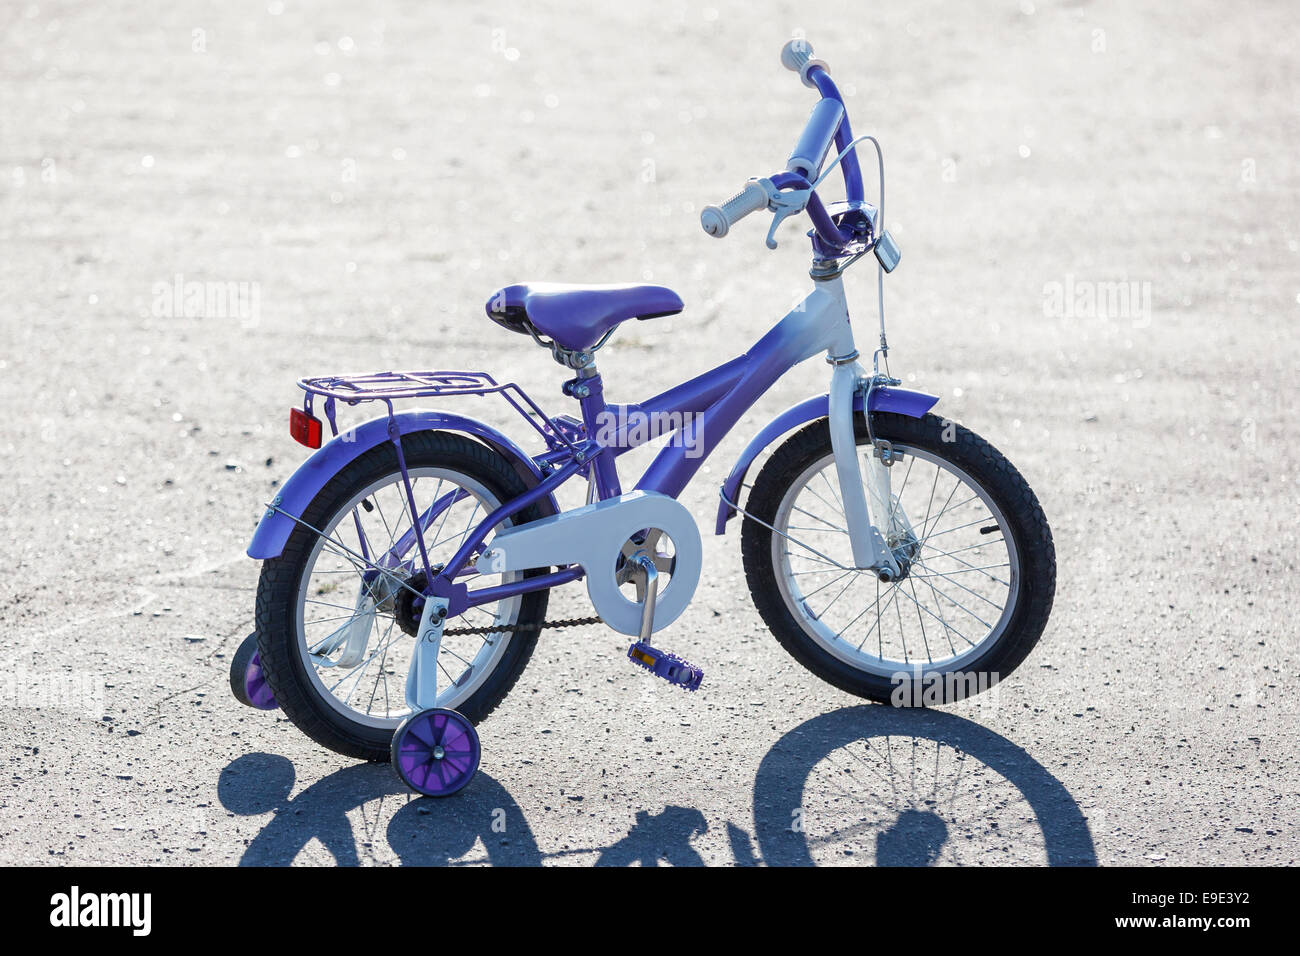 Small kids bike with training wheels outdoors. Stock Photo